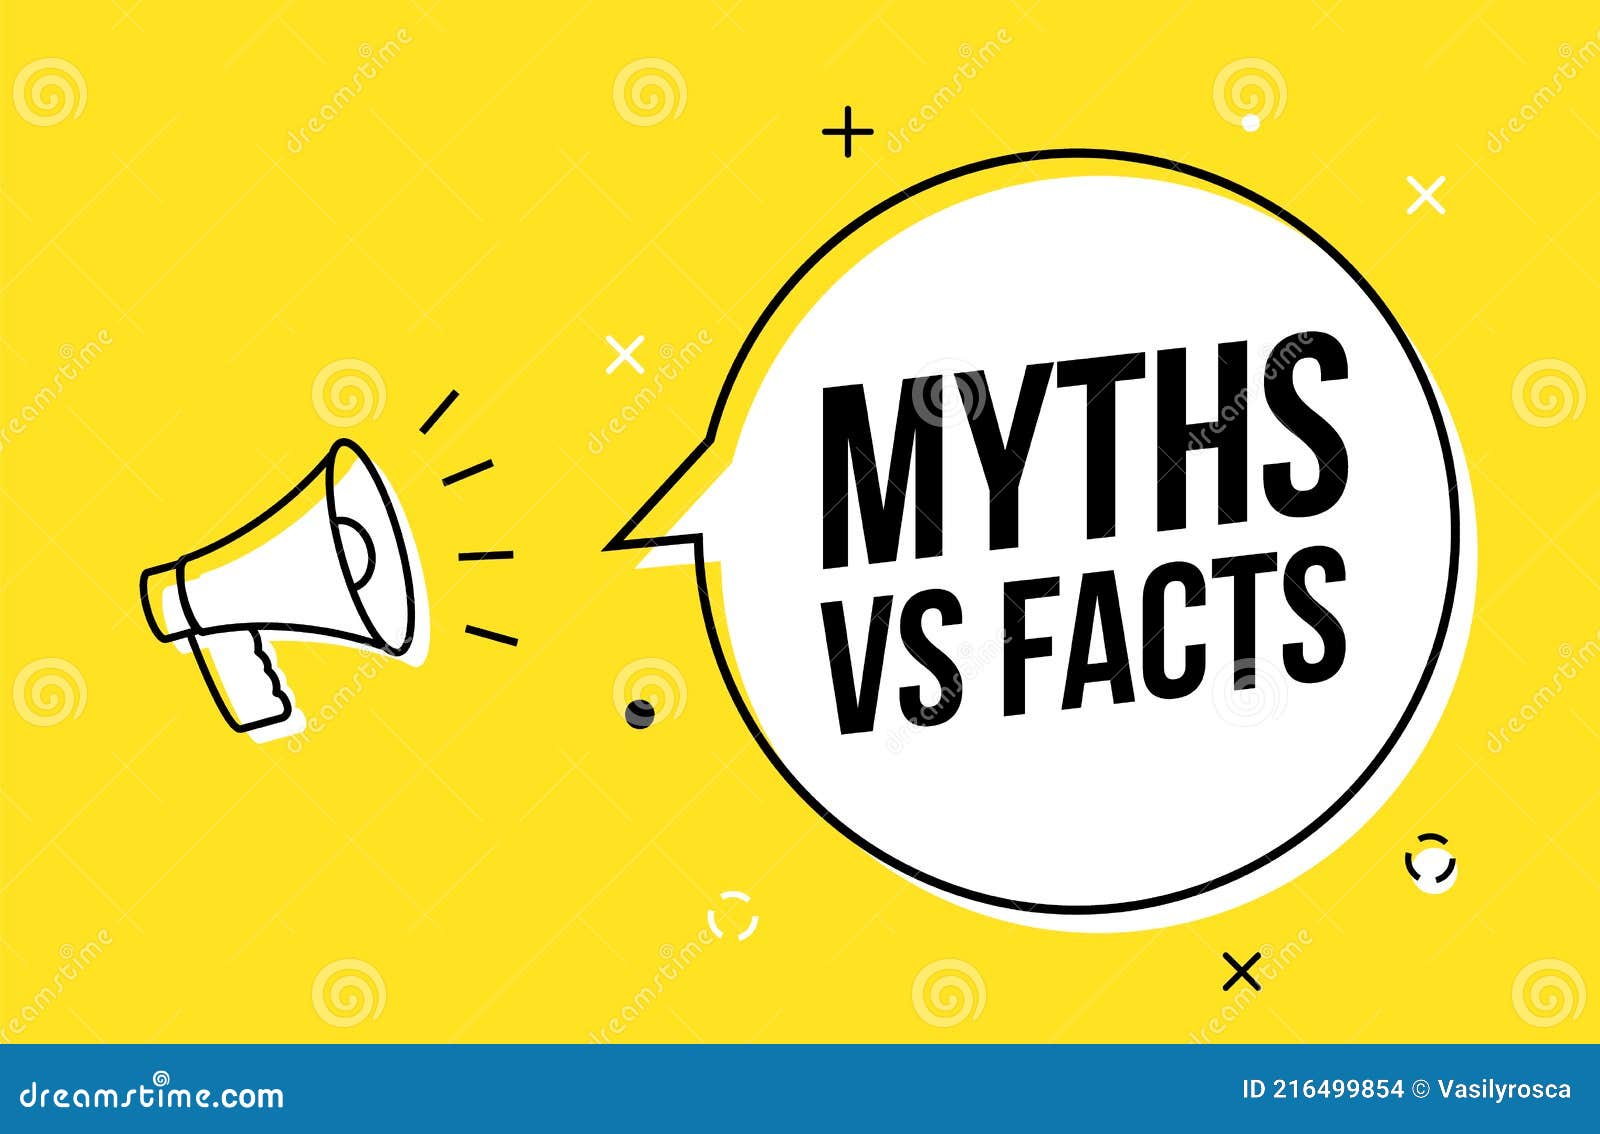 myths and facts logo  megaphone background. check fact truth fake concept